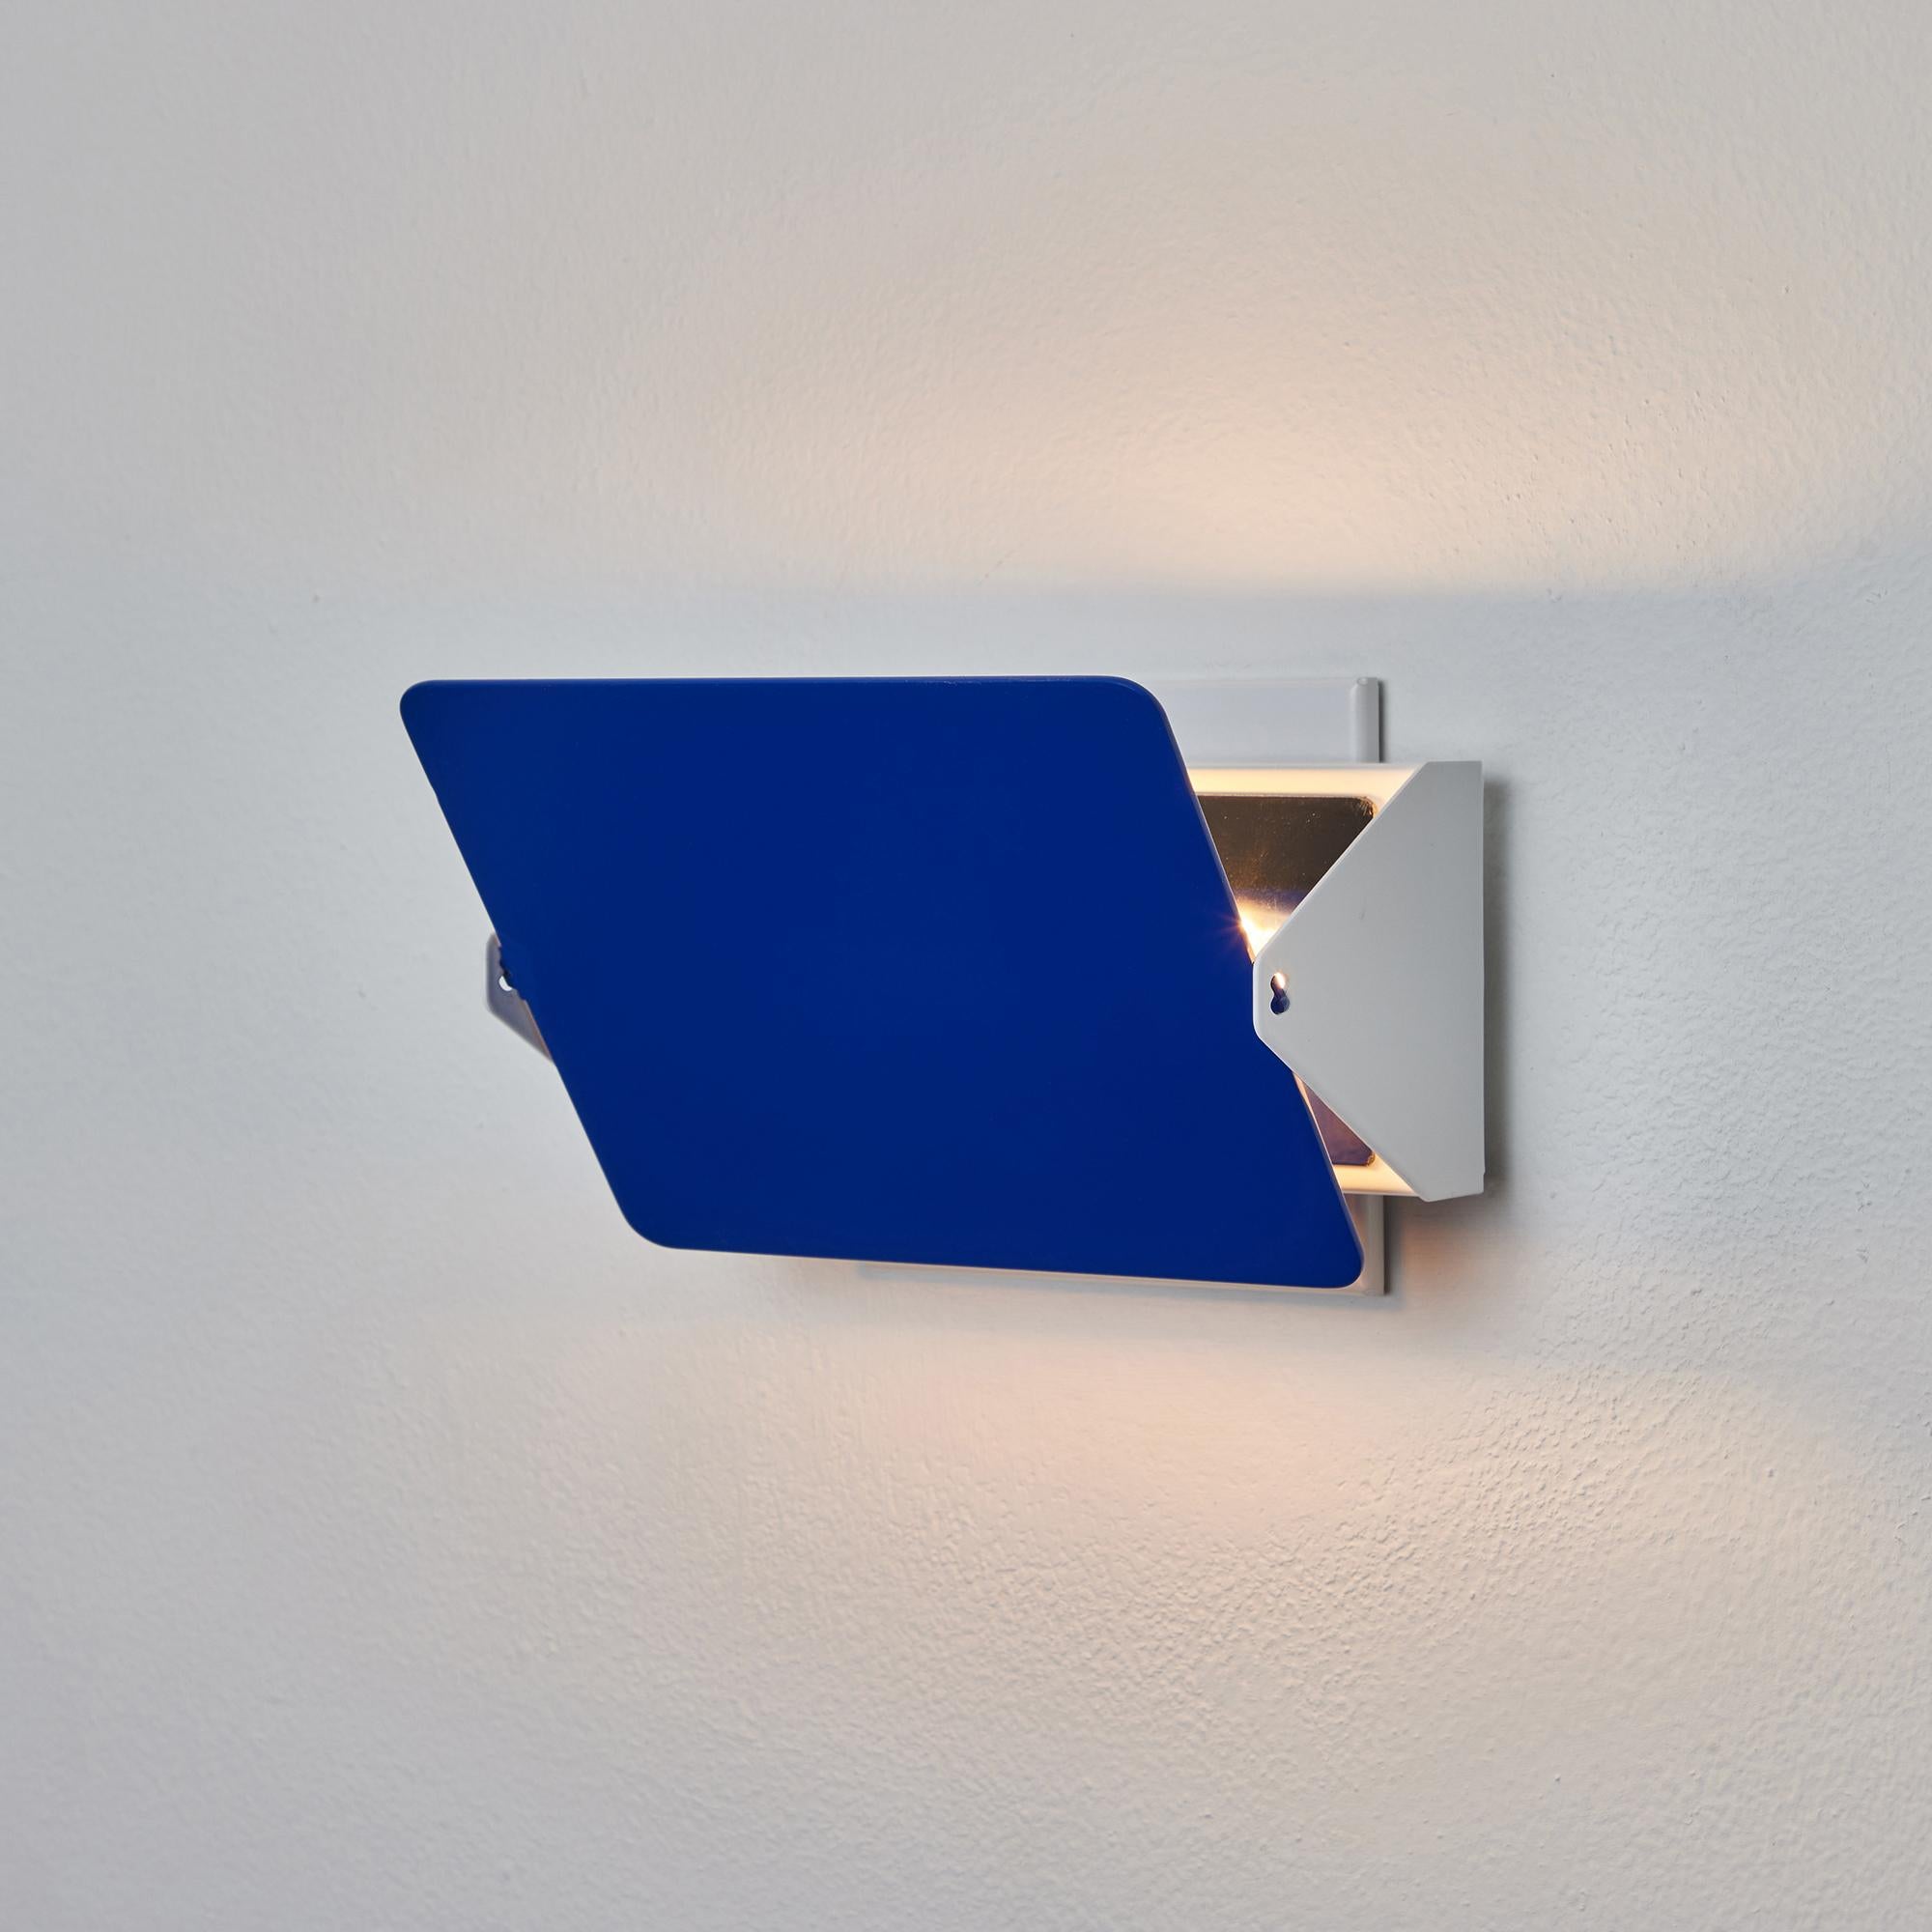 Charlotte Perriand 'Applique à Volet Pivotant' Wall Light in Blue for Nemo In New Condition For Sale In Glendale, CA